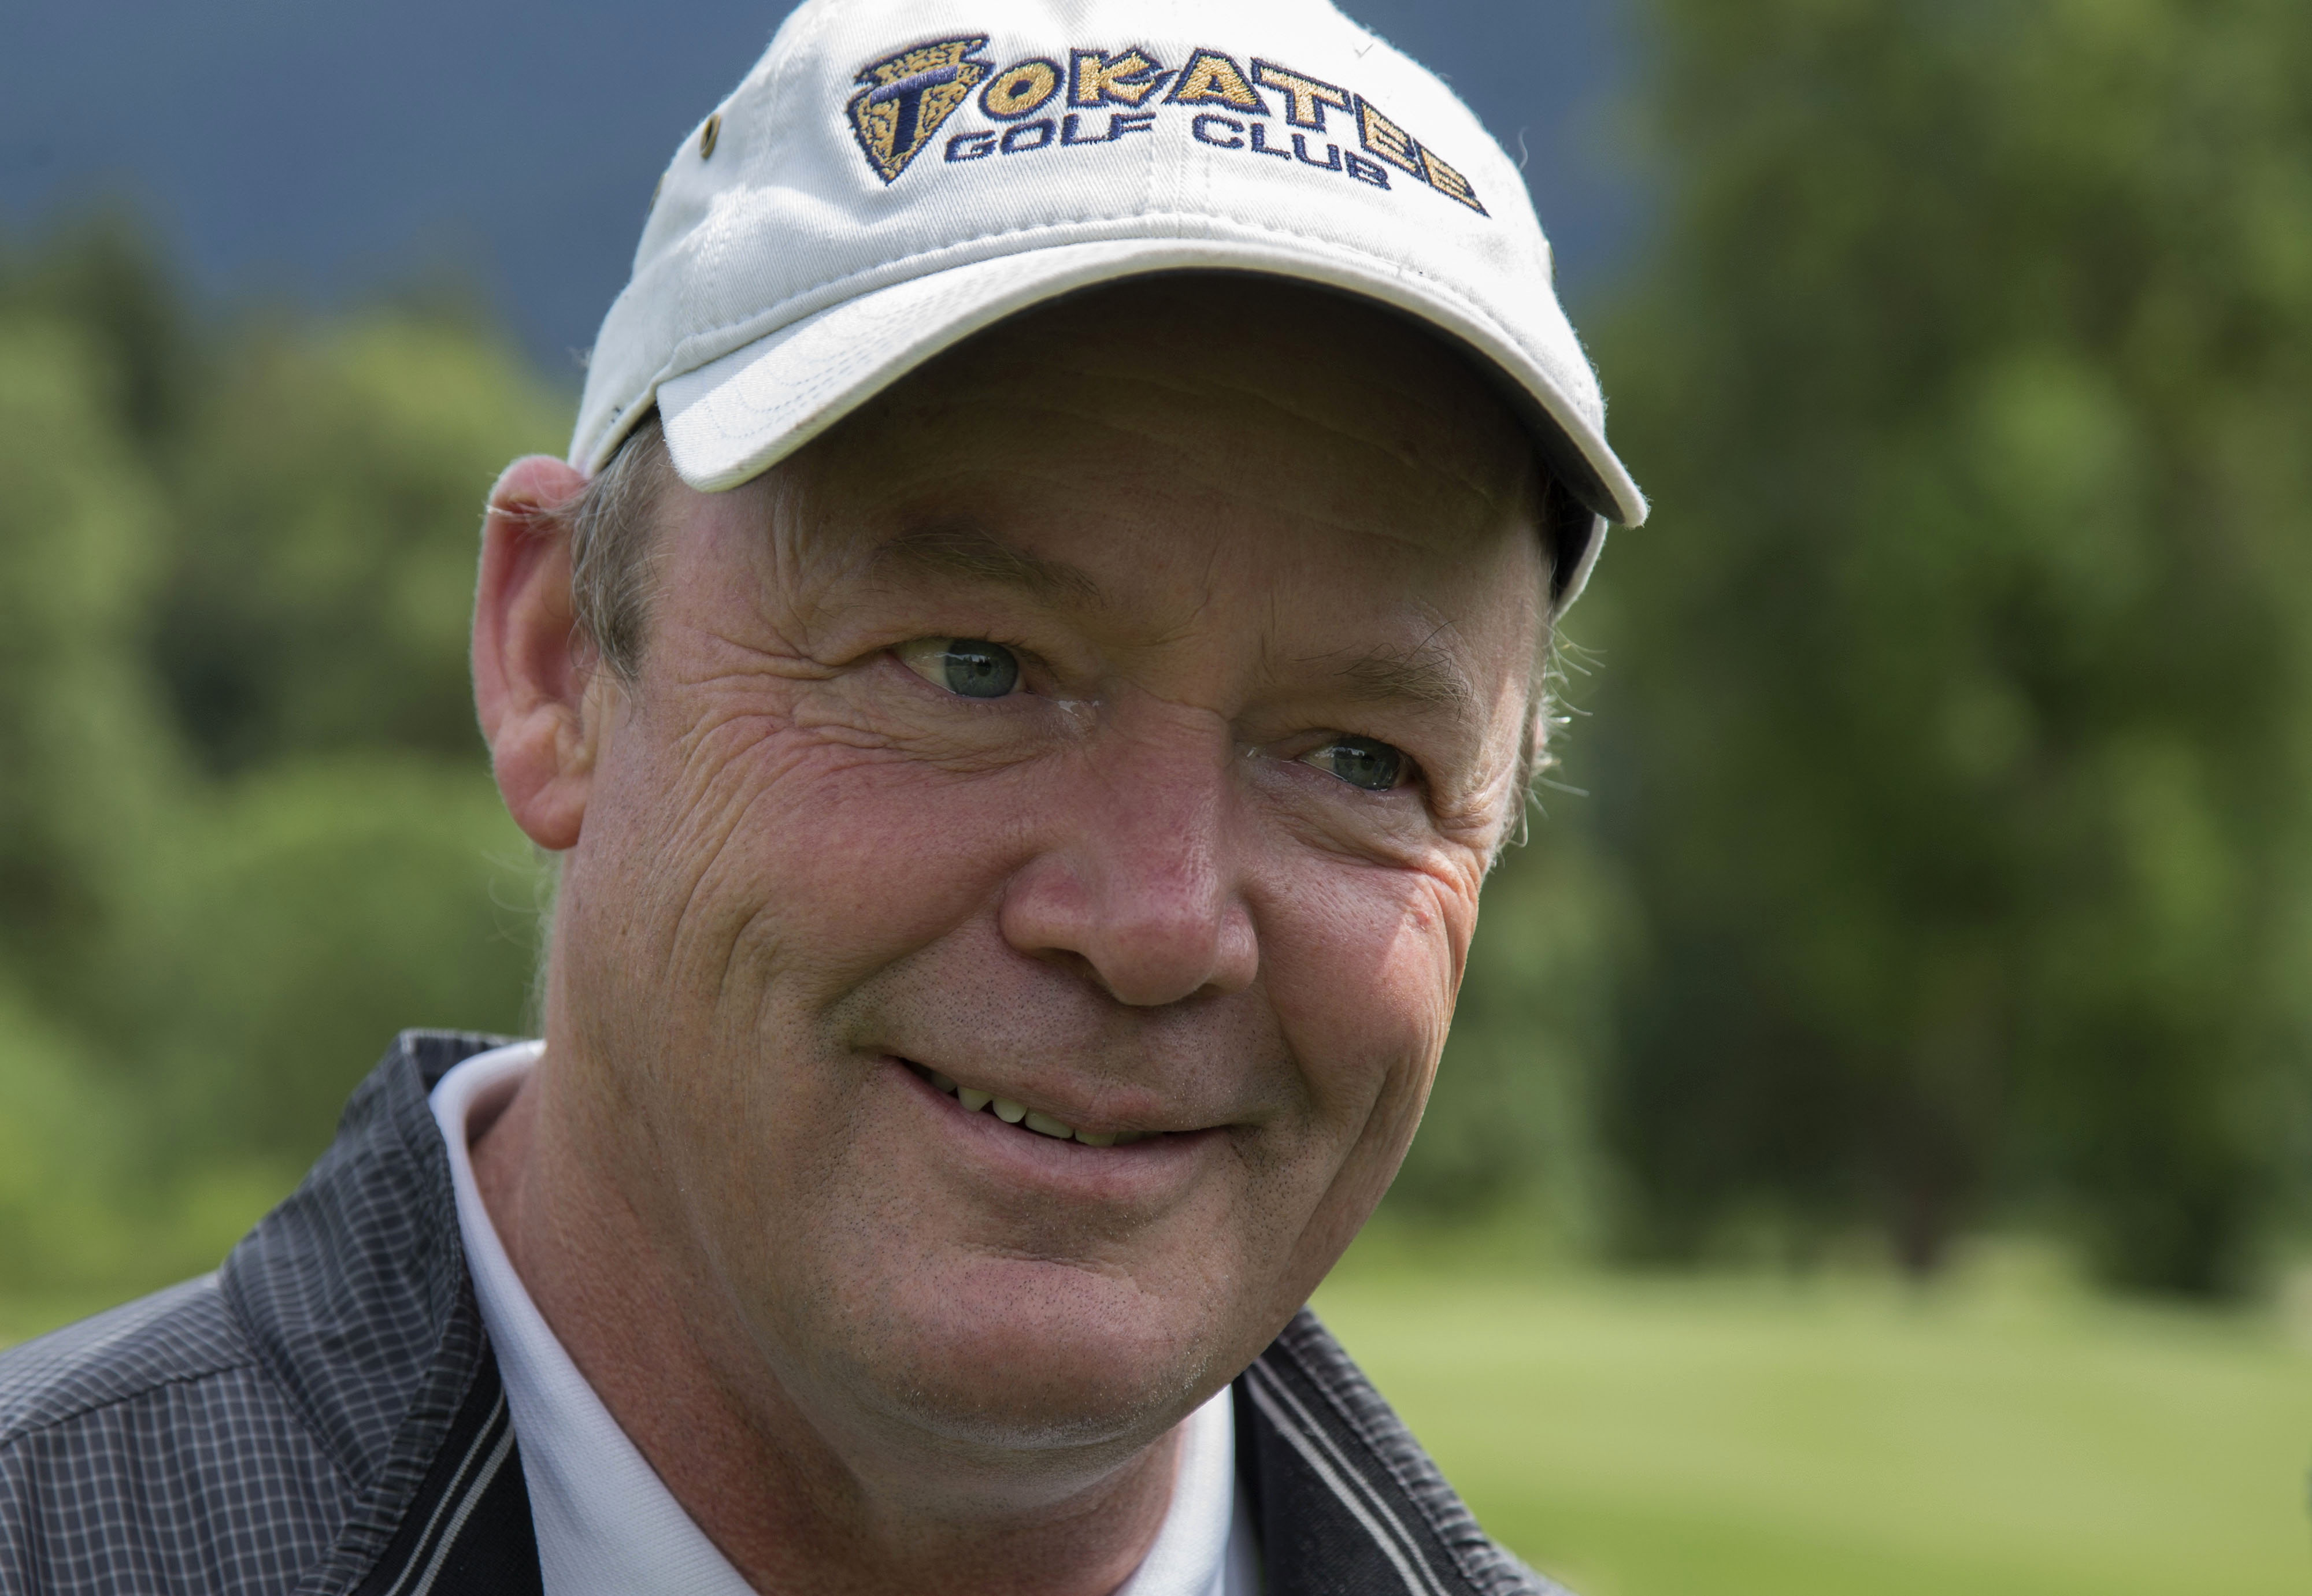 Dan King: Tokatee Golf Club pro is trying to top his predecessor